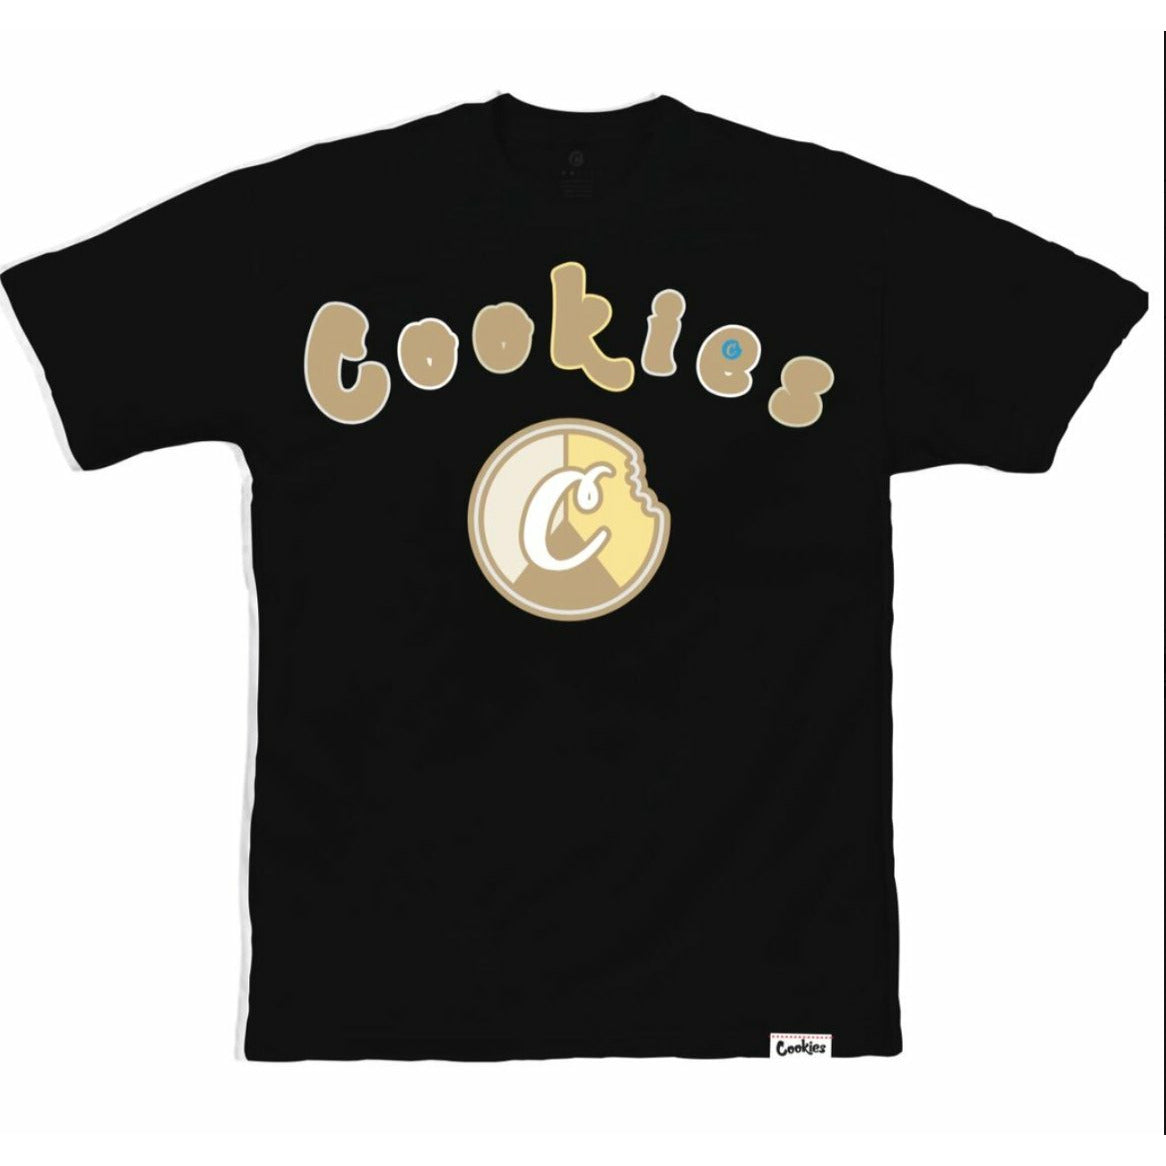 Cookies Show and Prove Tee Black - Dousedshop